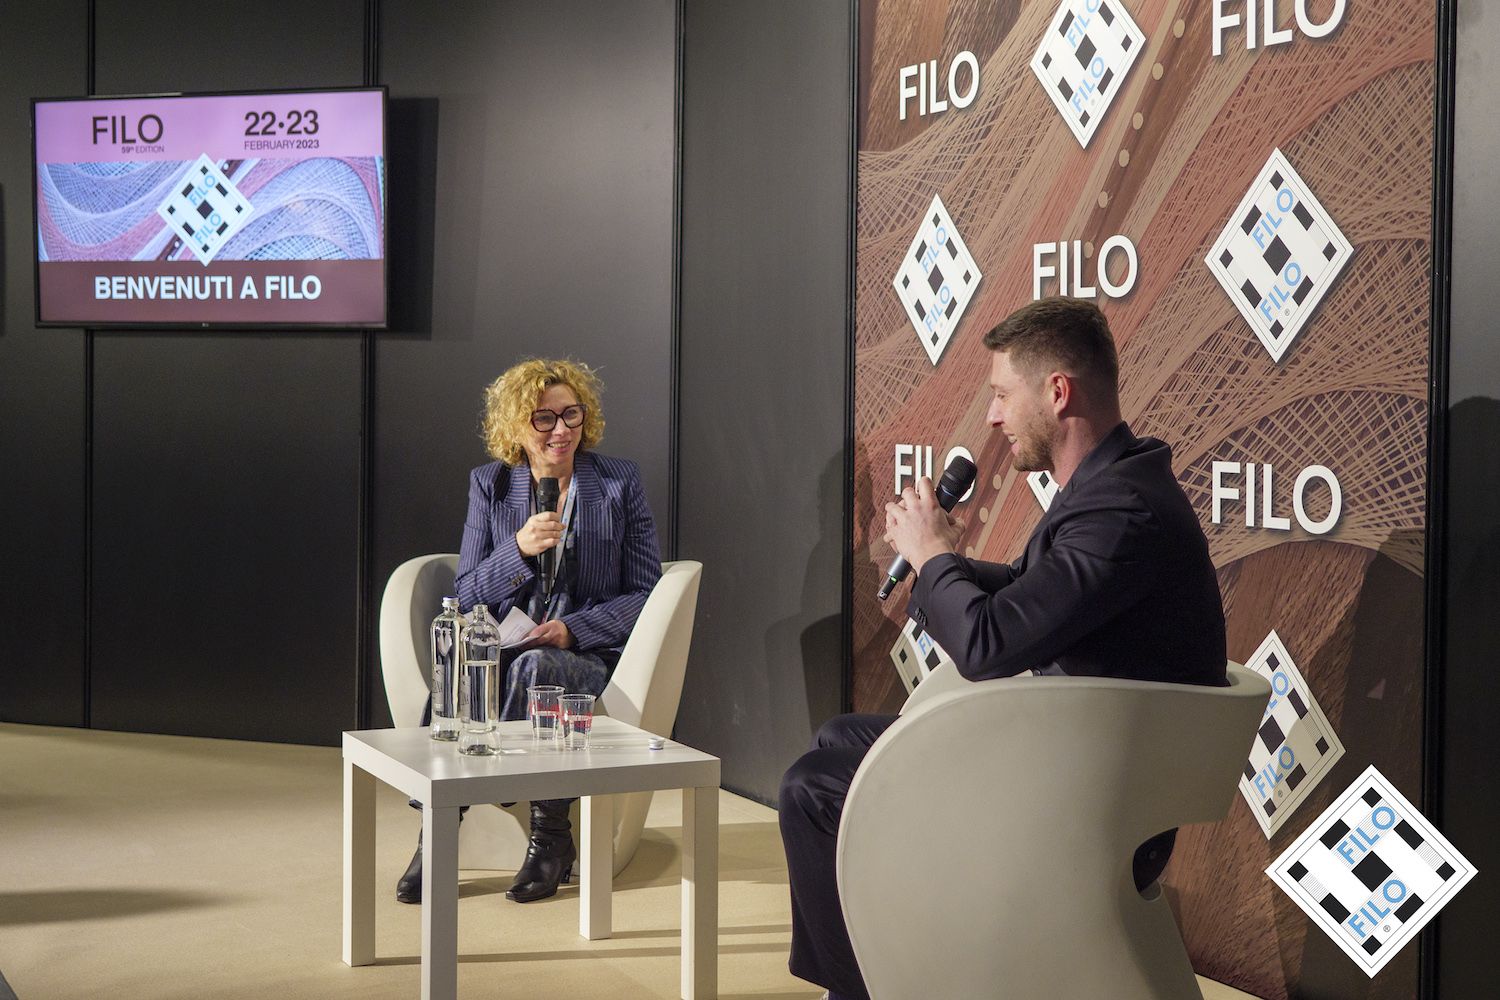 Giusy Bettoni, CEO and founder of eco hub C.L.A.S.S, talks sustainability and traceability with Fulgar’s Alan Garosi. © Filo